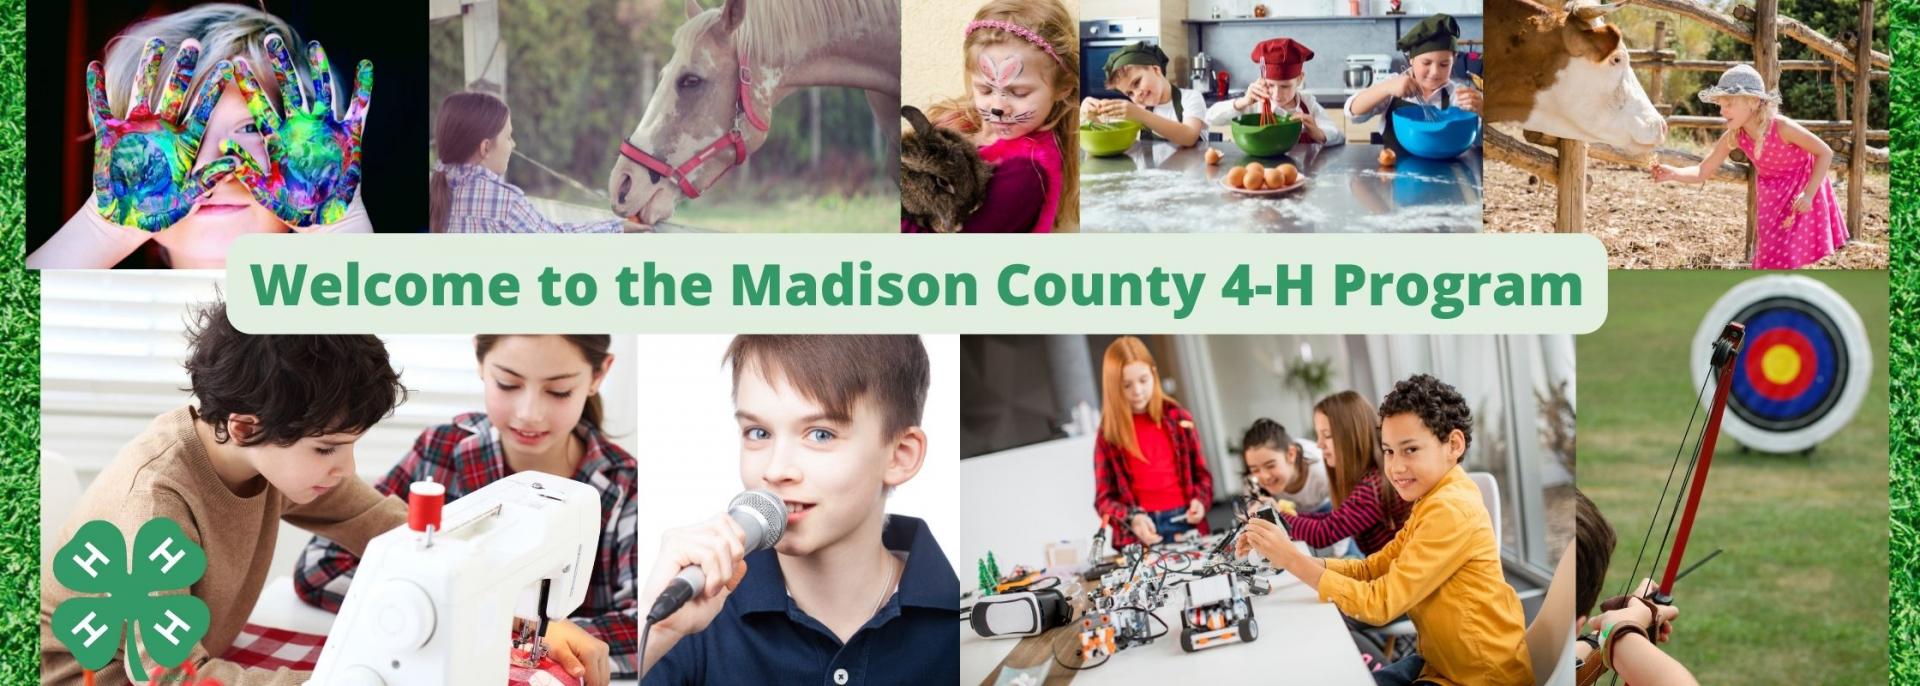 Welcome to the Madison County 4h program